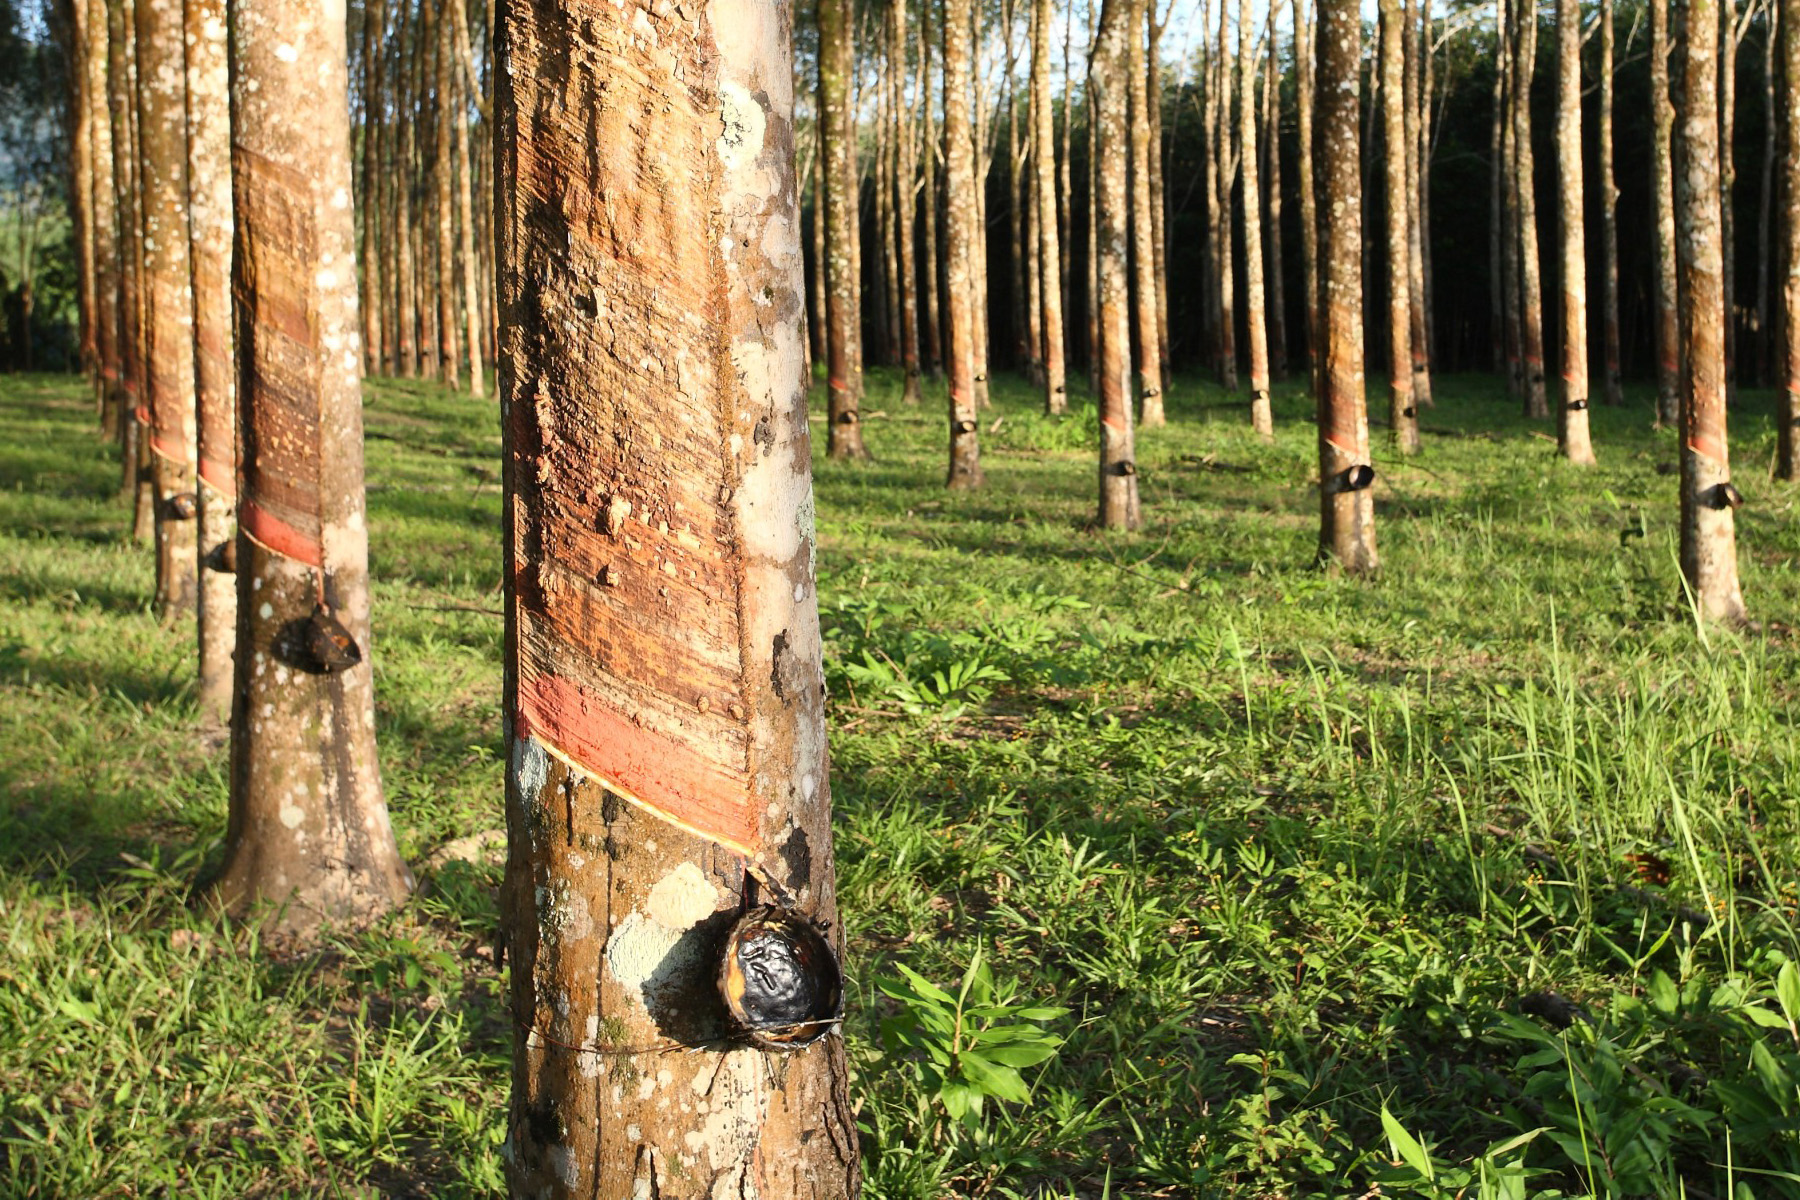 rubberwood parawood trees growing at a rubber farm